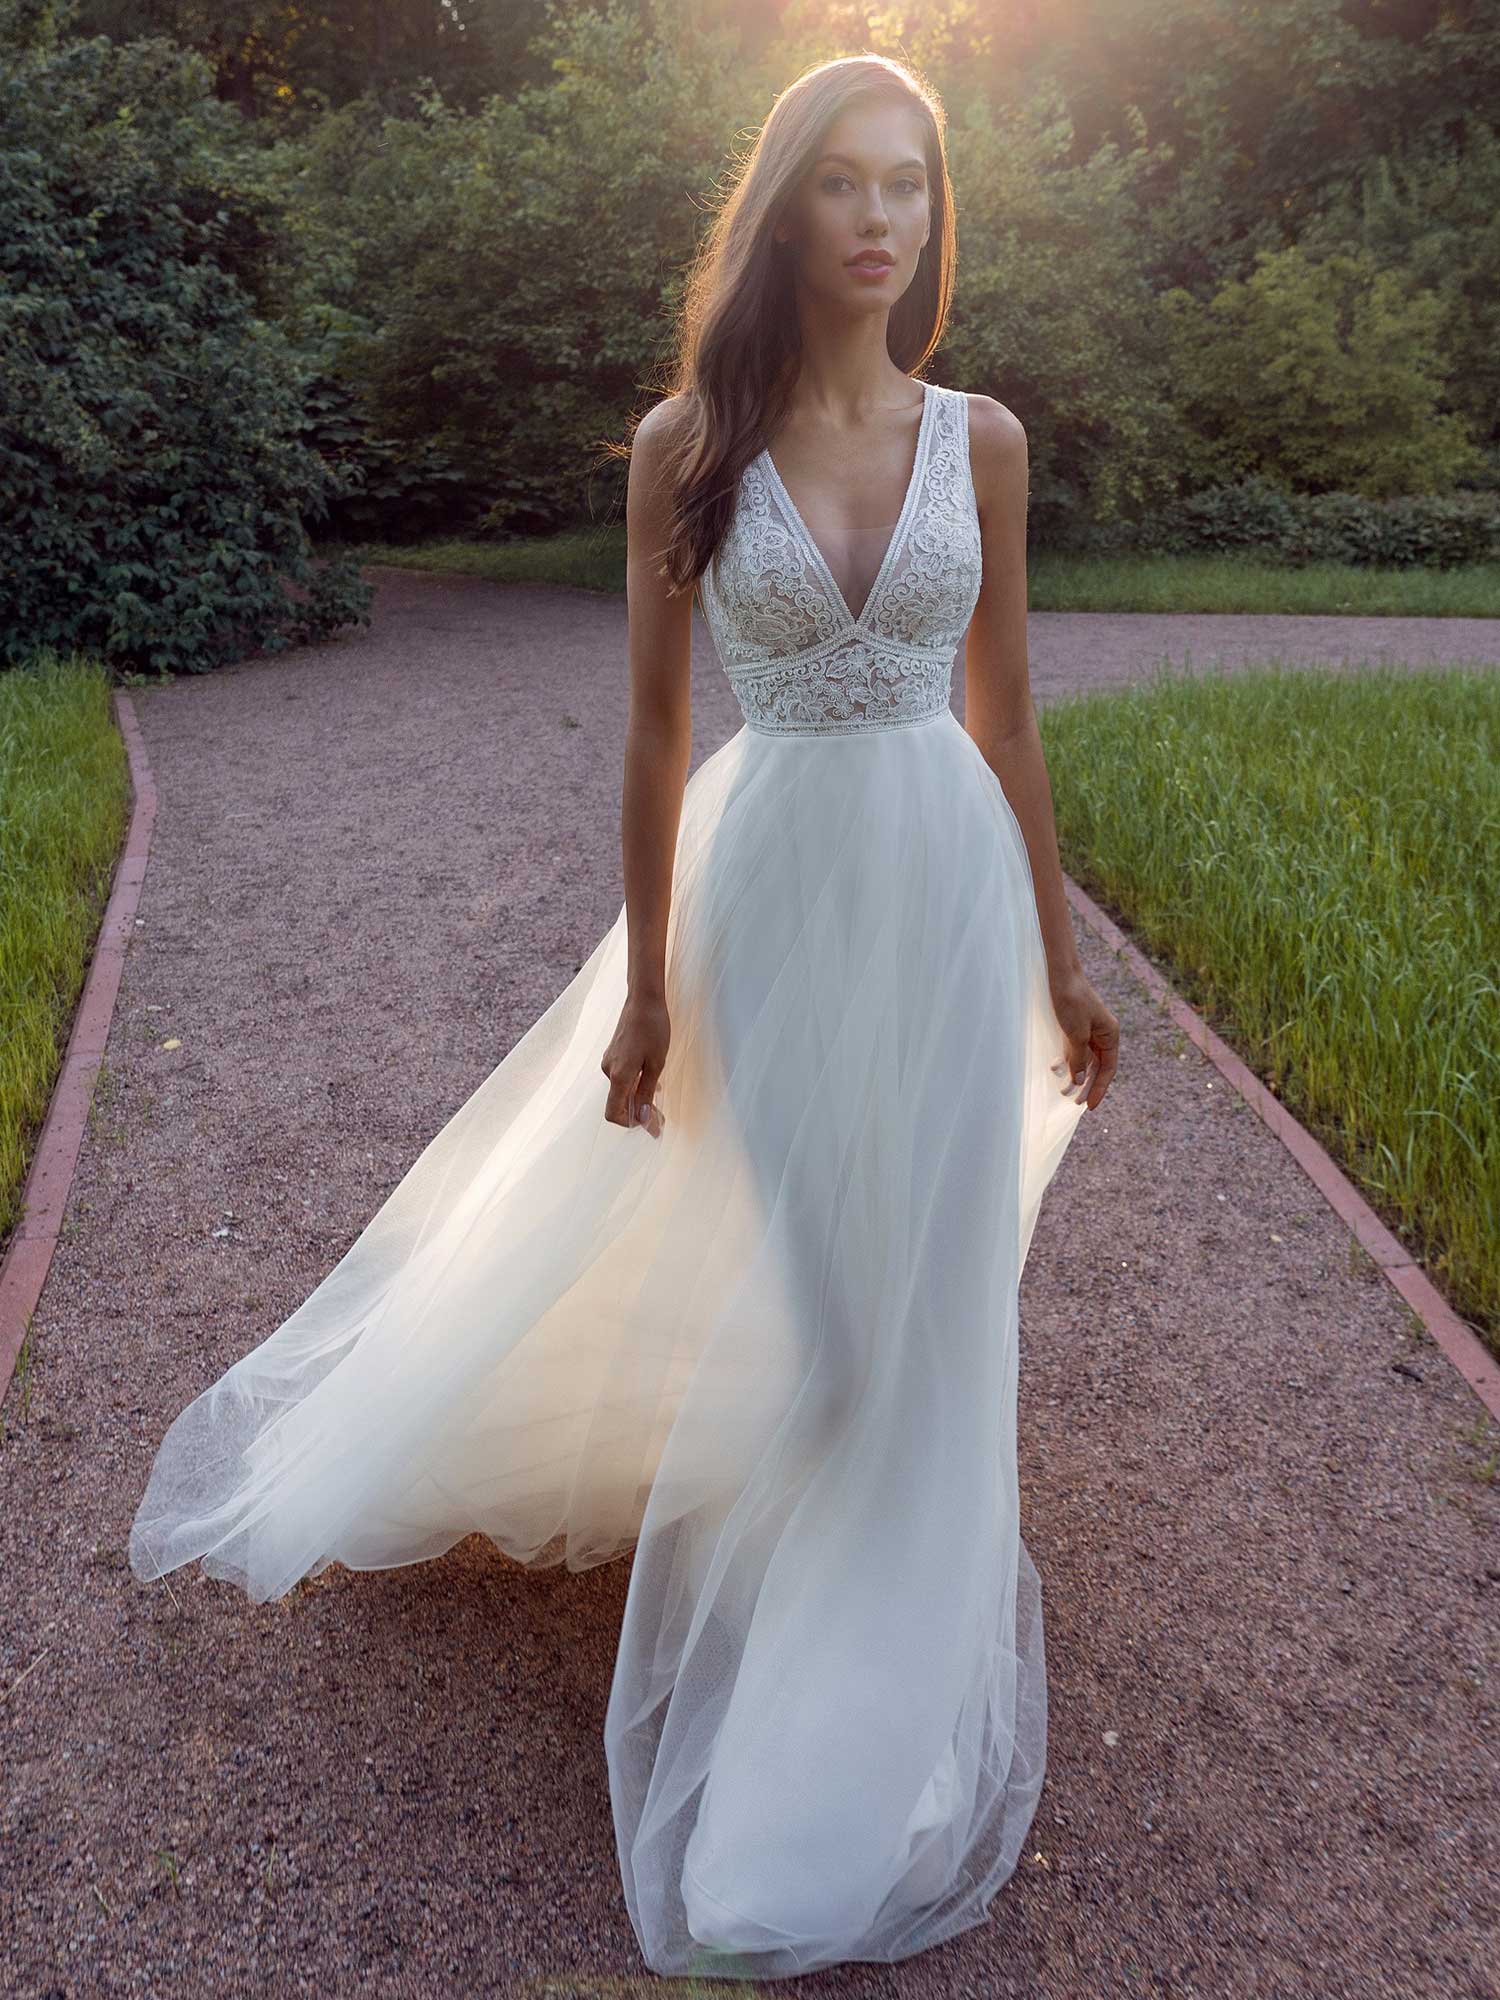 Wedding Dresses V Back Top Review - Find the Perfect Venue for Your ...